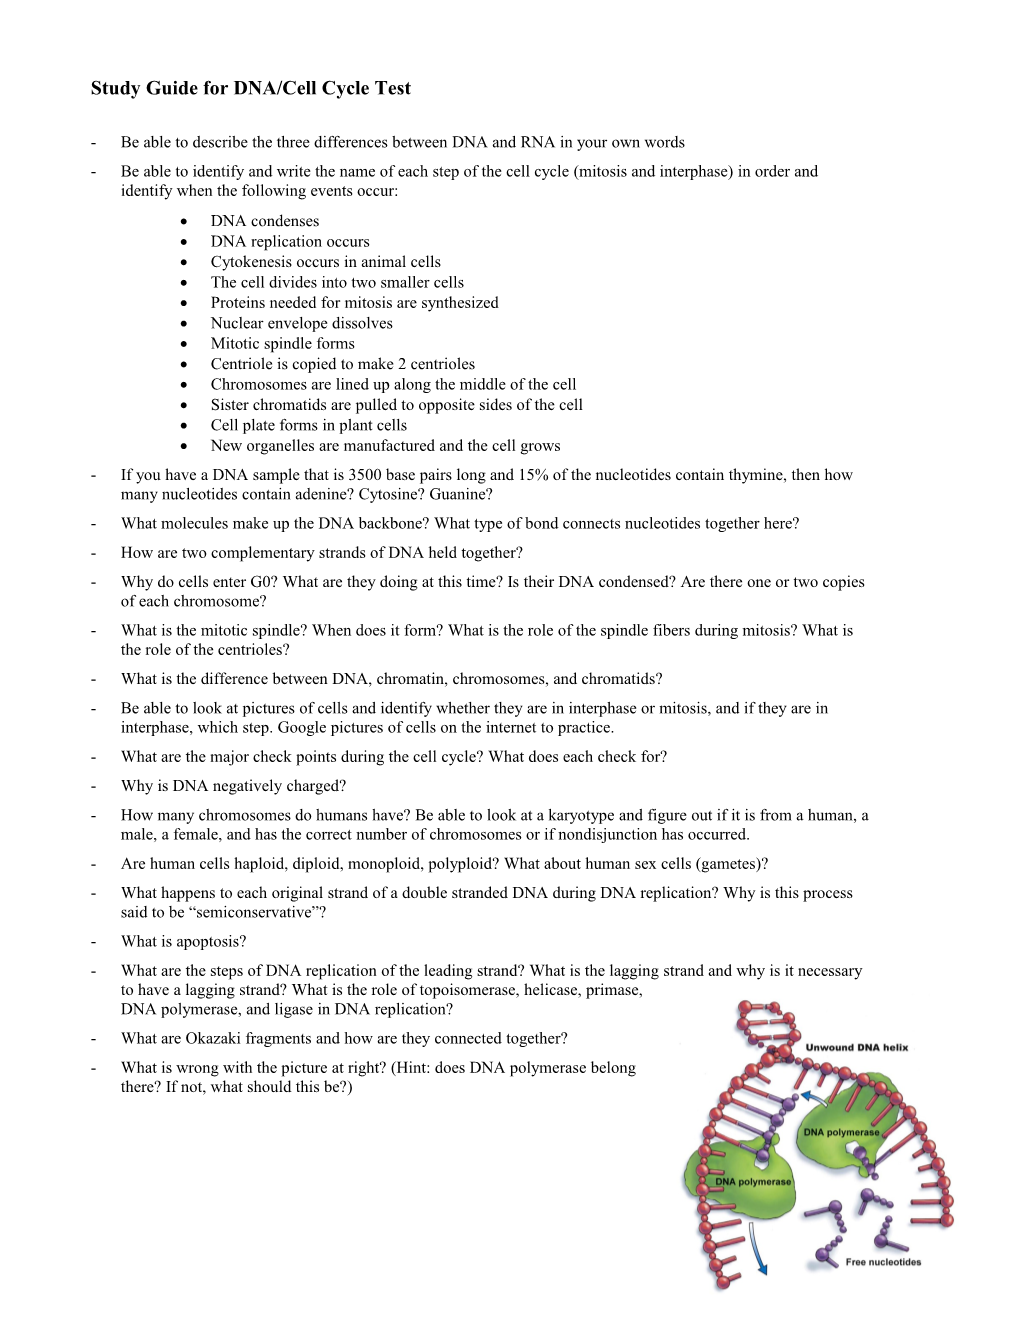 Study Guide for DNA/Cell Cycle Test